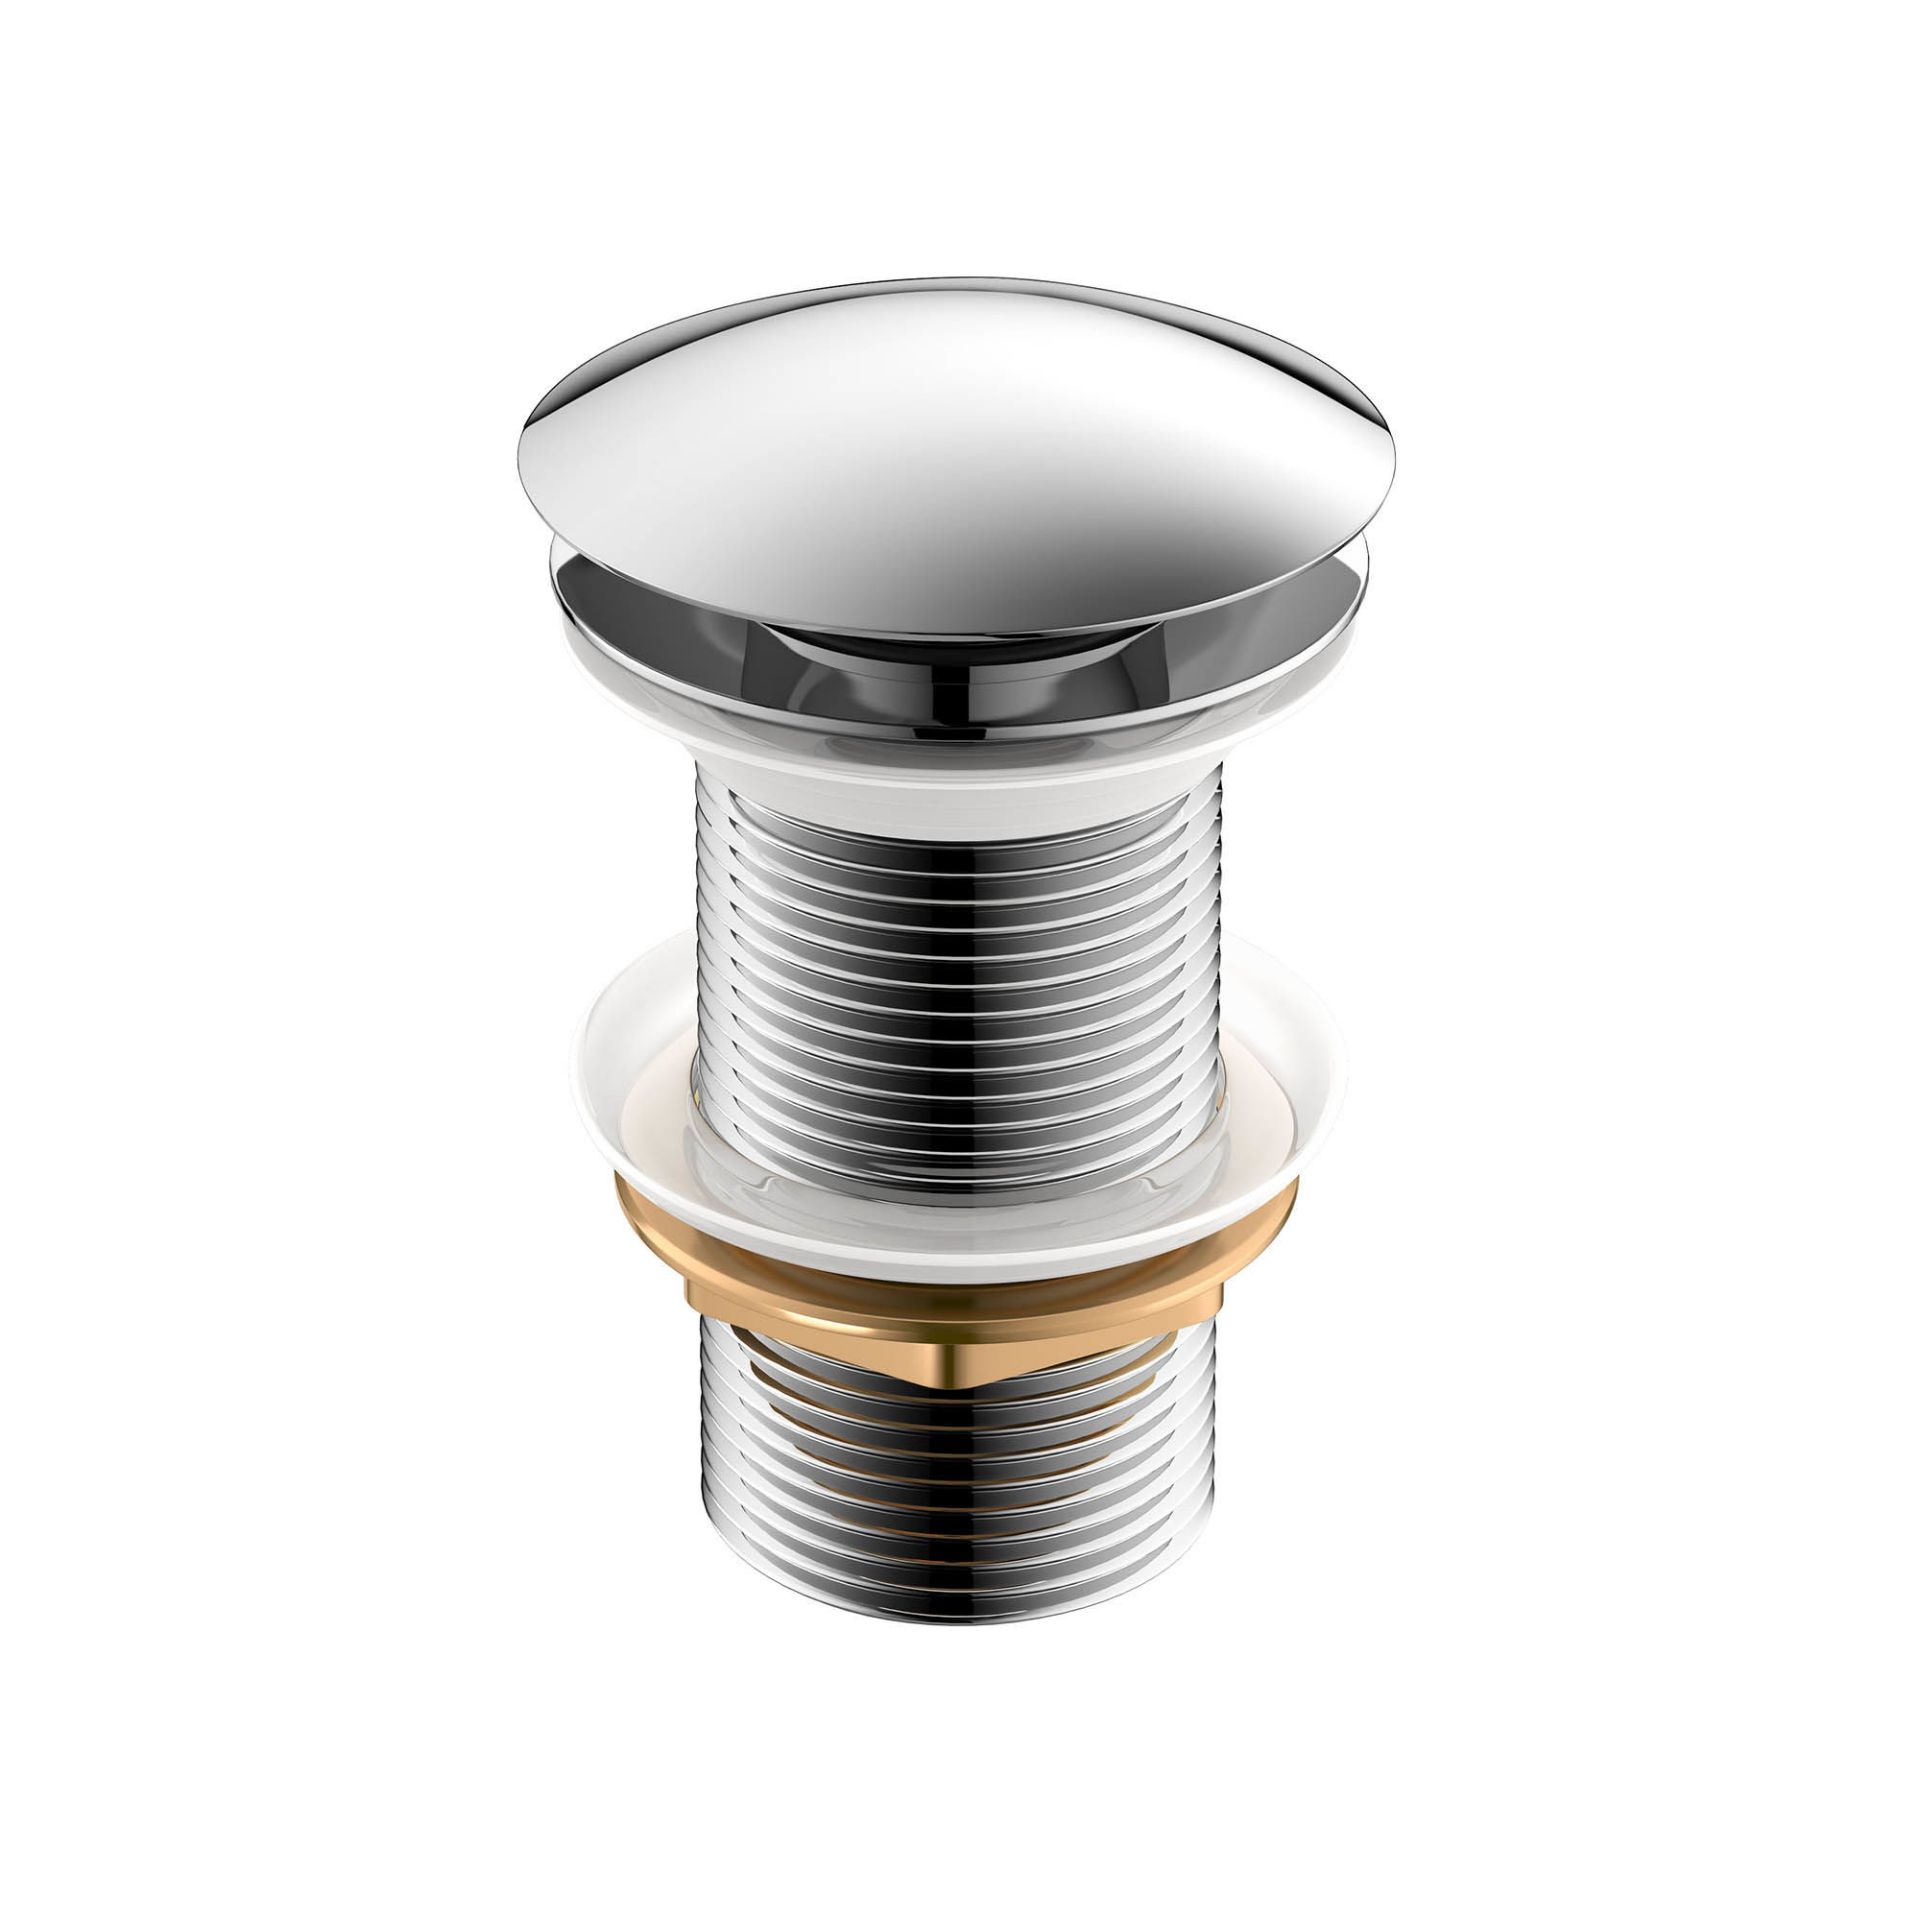 (YU1022) Basin Waste - Unslotted Push Button Pop-Up Made with zinc with solid brass components...